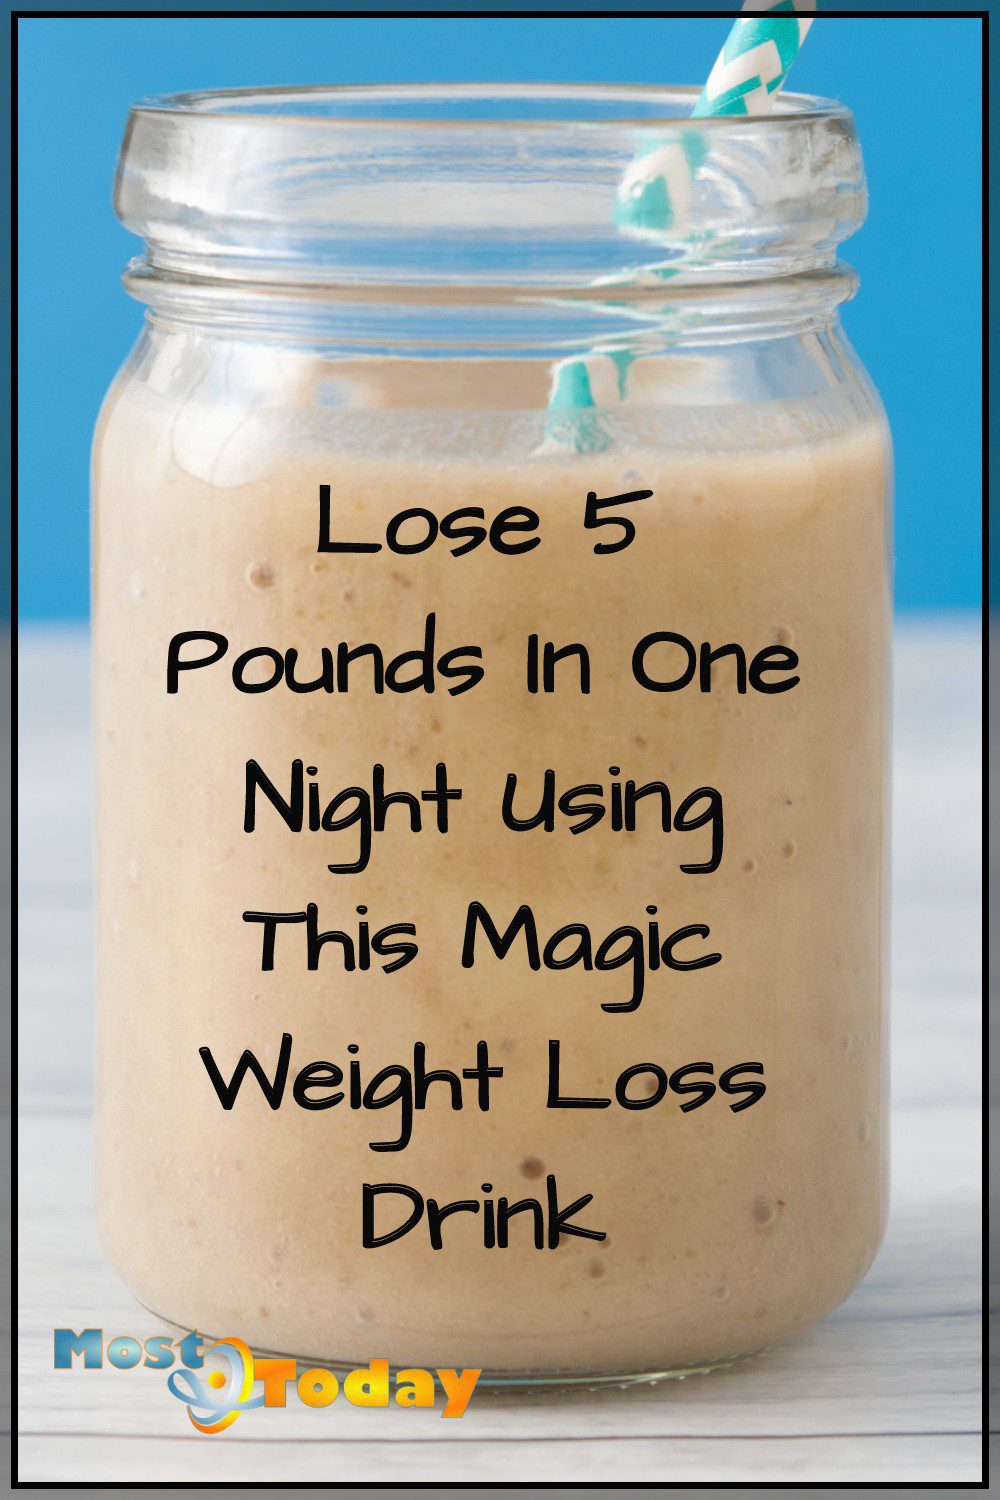 Lose 3 Pounds In 1 Night Using Magic Weight Loss Drink